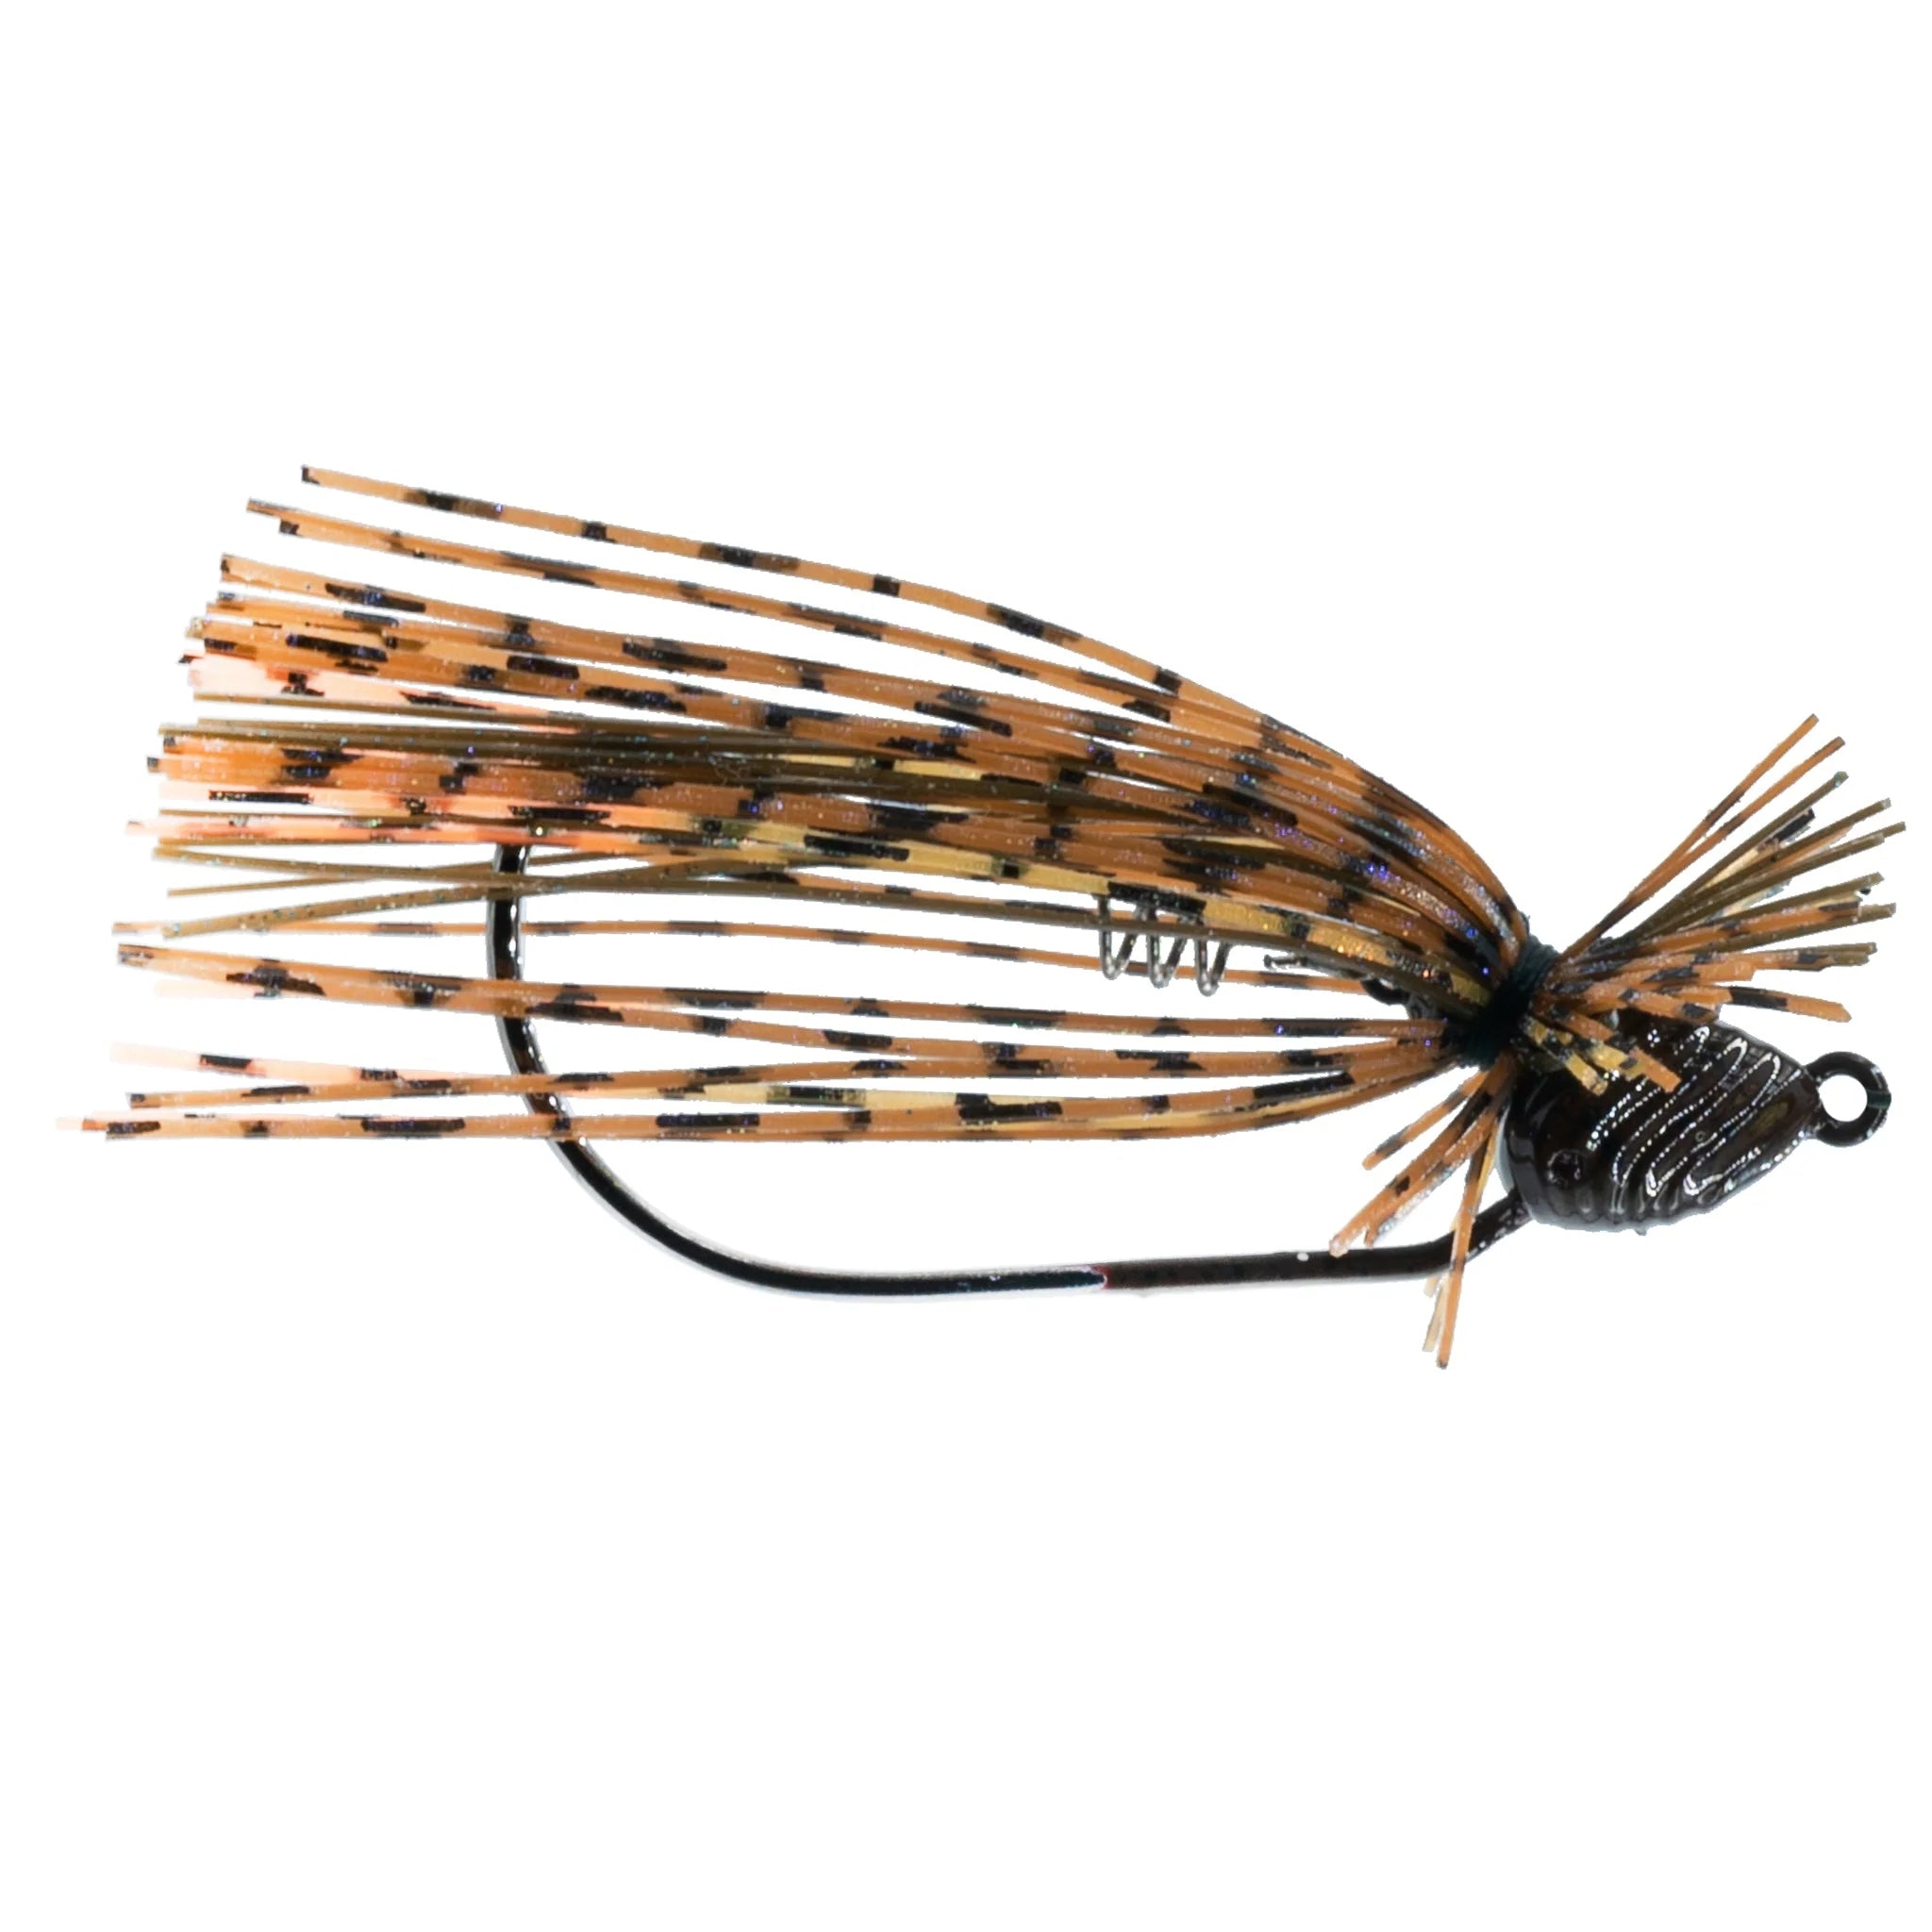 Buy tipped-craw 6TH SENSE AXLE HYBRID FINESSE JIG